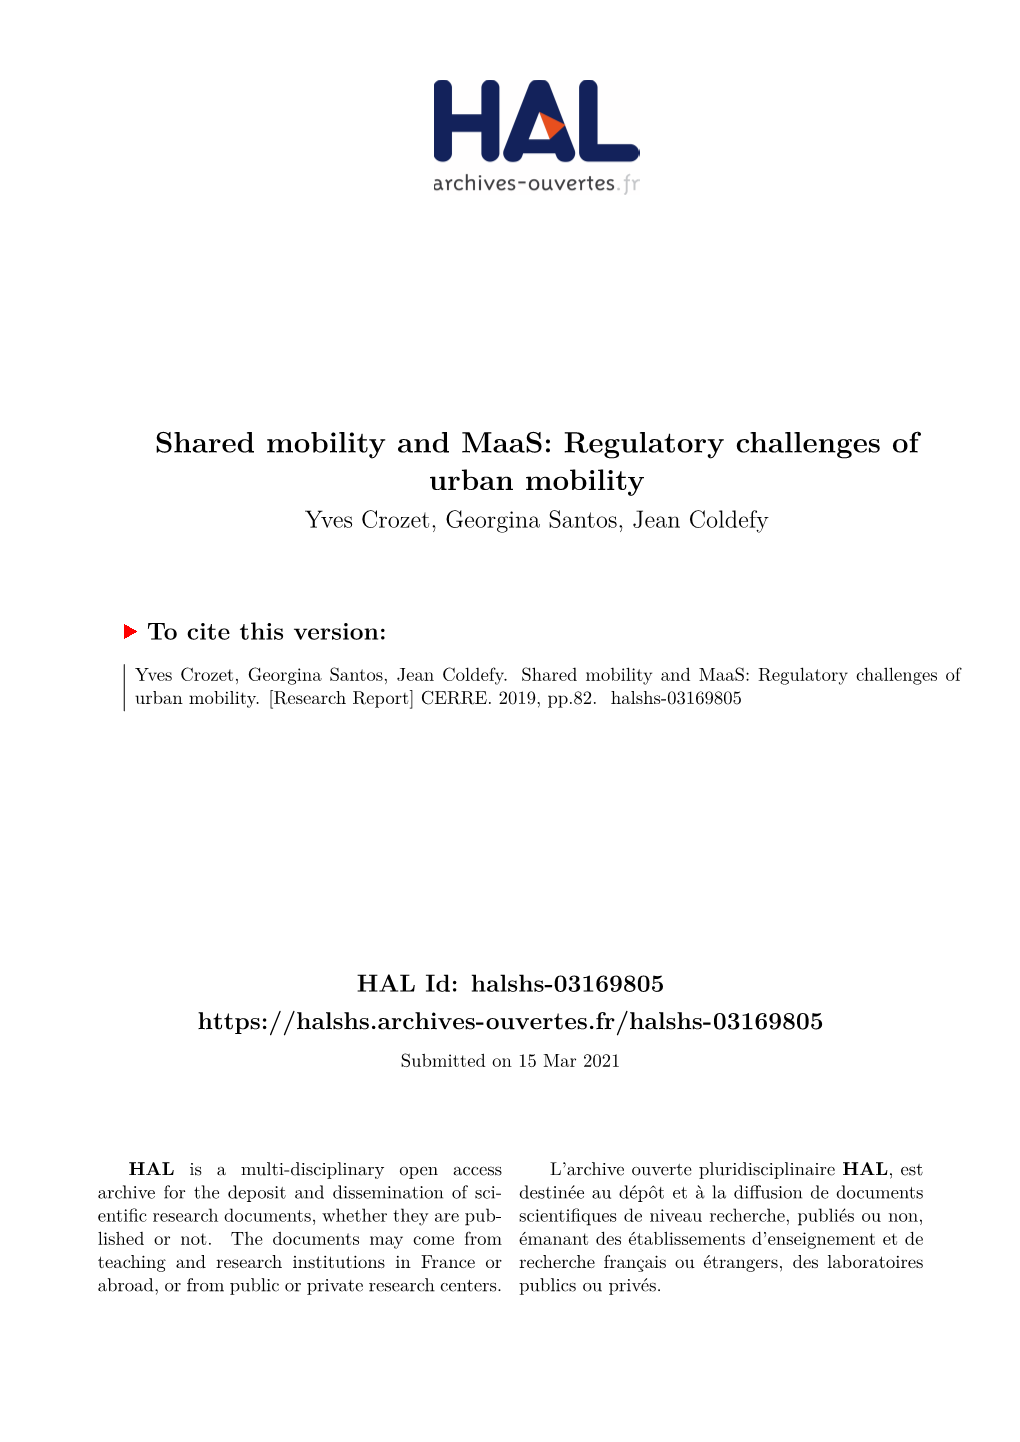 Shared Mobility and Maas: Regulatory Challenges of Urban Mobility Yves Crozet, Georgina Santos, Jean Coldefy